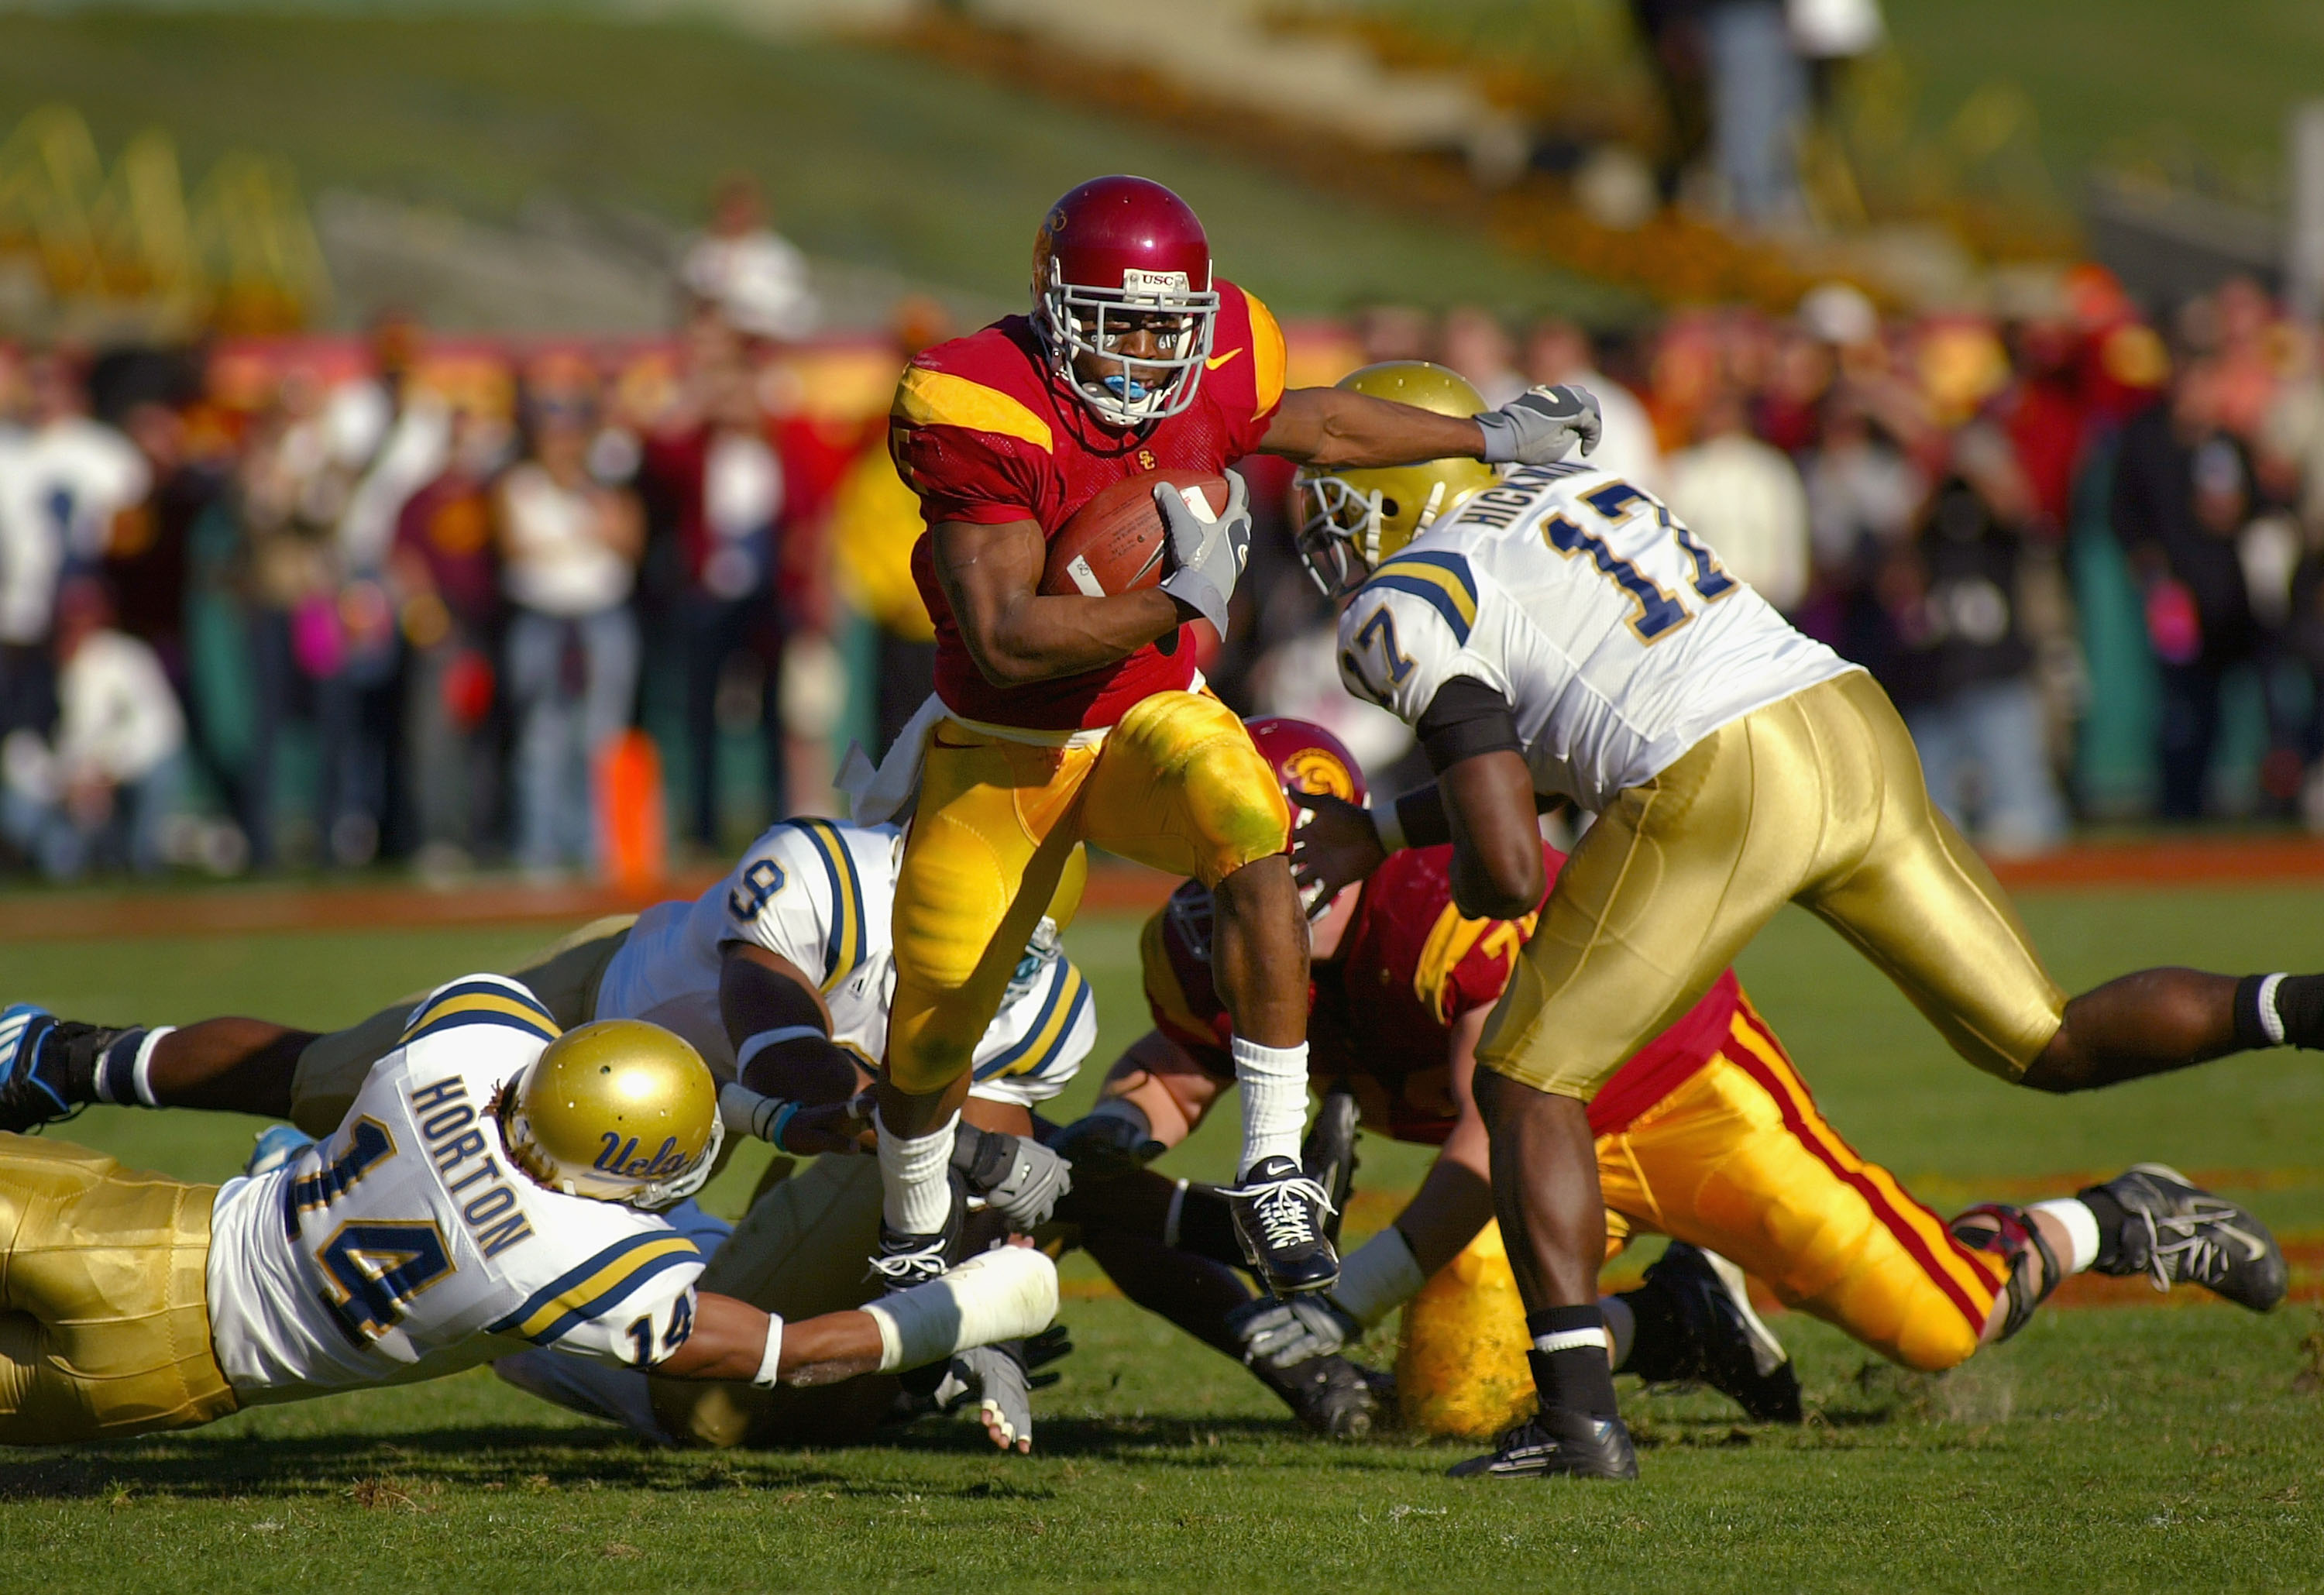 LOS ANGELES, CA - DECEMBER 03:  Reggie Bush #5 of the USC Trojans runs with the ball against the UCLA Bruins during the game on December 3, 2005 at the Los Angeles Memorial Coliseum in Los Angeles, California. USC won 66-19. (Photo by Christian Petersen/G